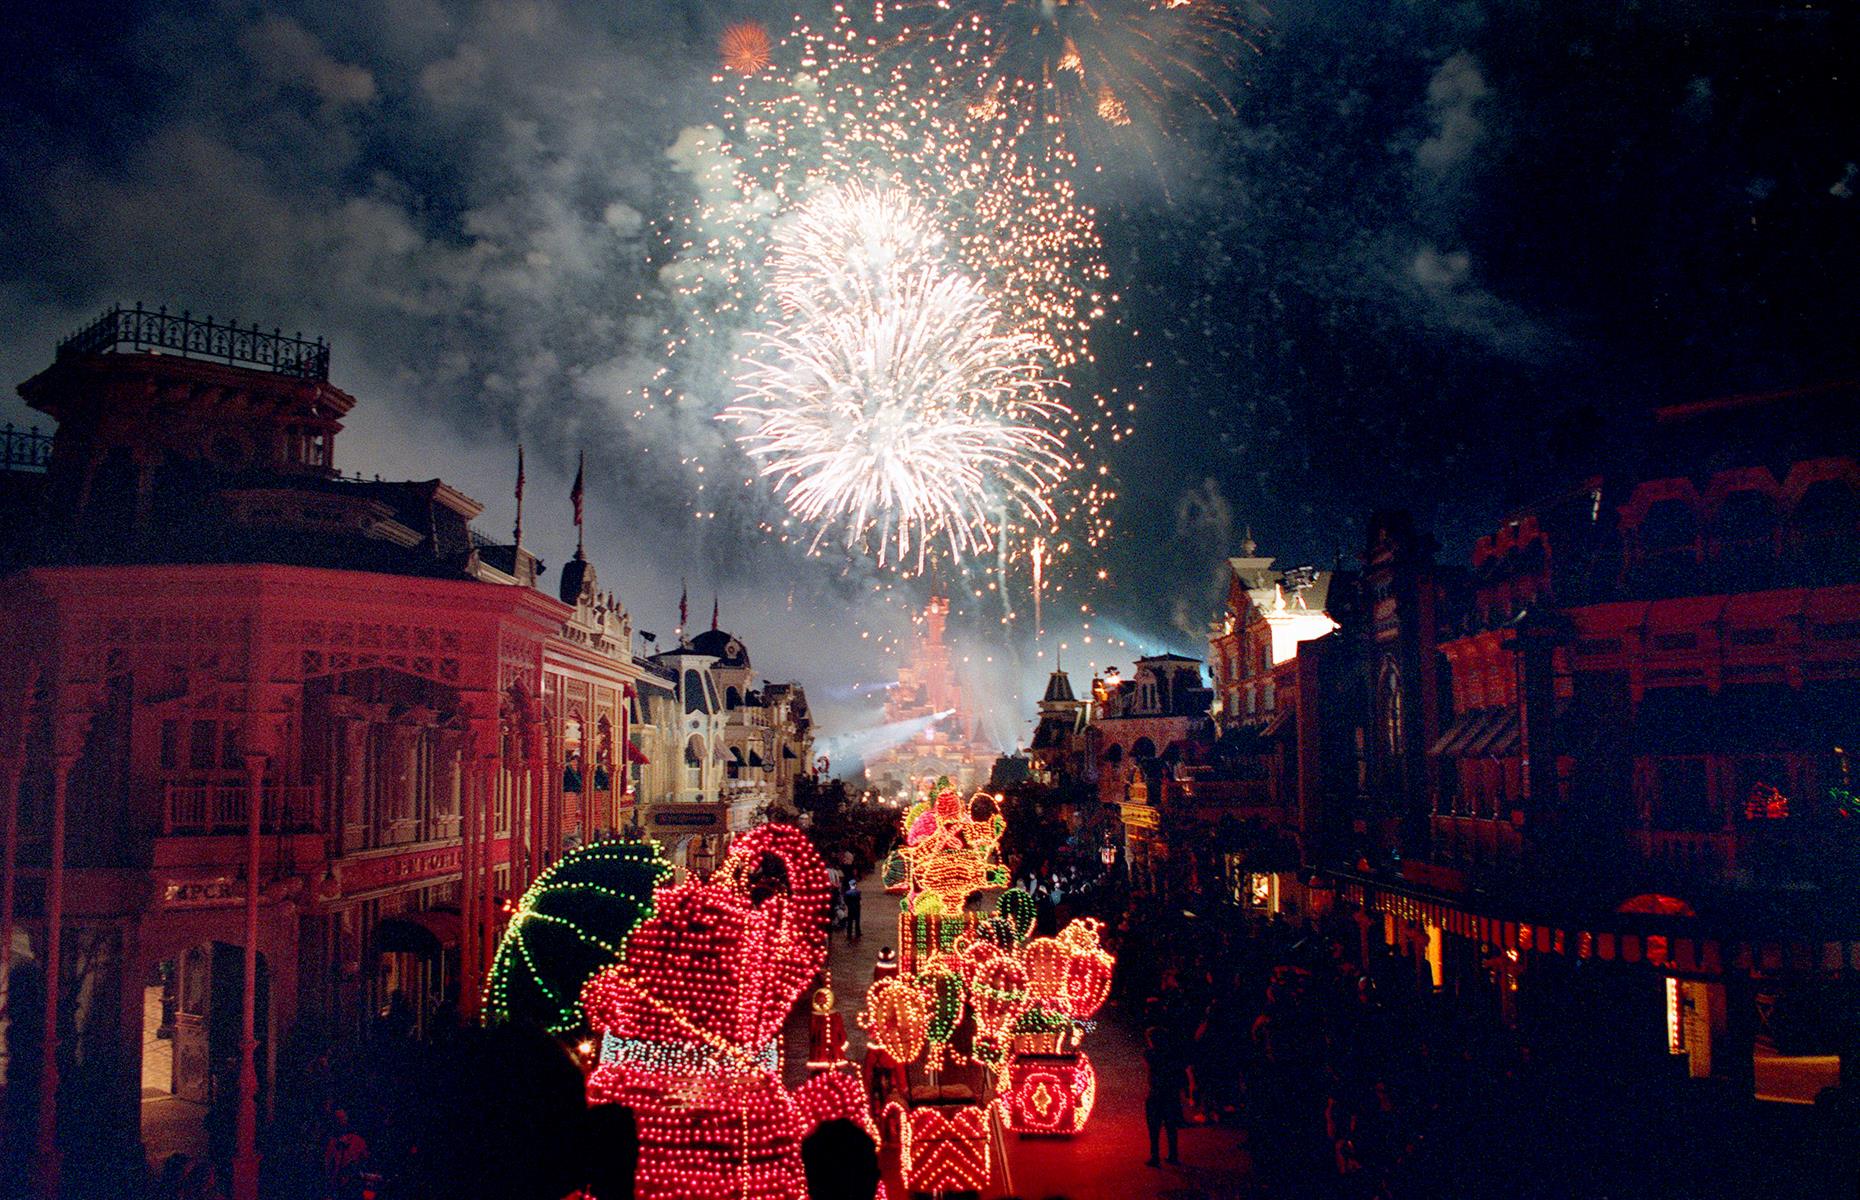 The final hours of Euro Disney's opening day went with a bang. Fireworks glittered over the new park and floats bright with lights passed in a parade through Main Street.